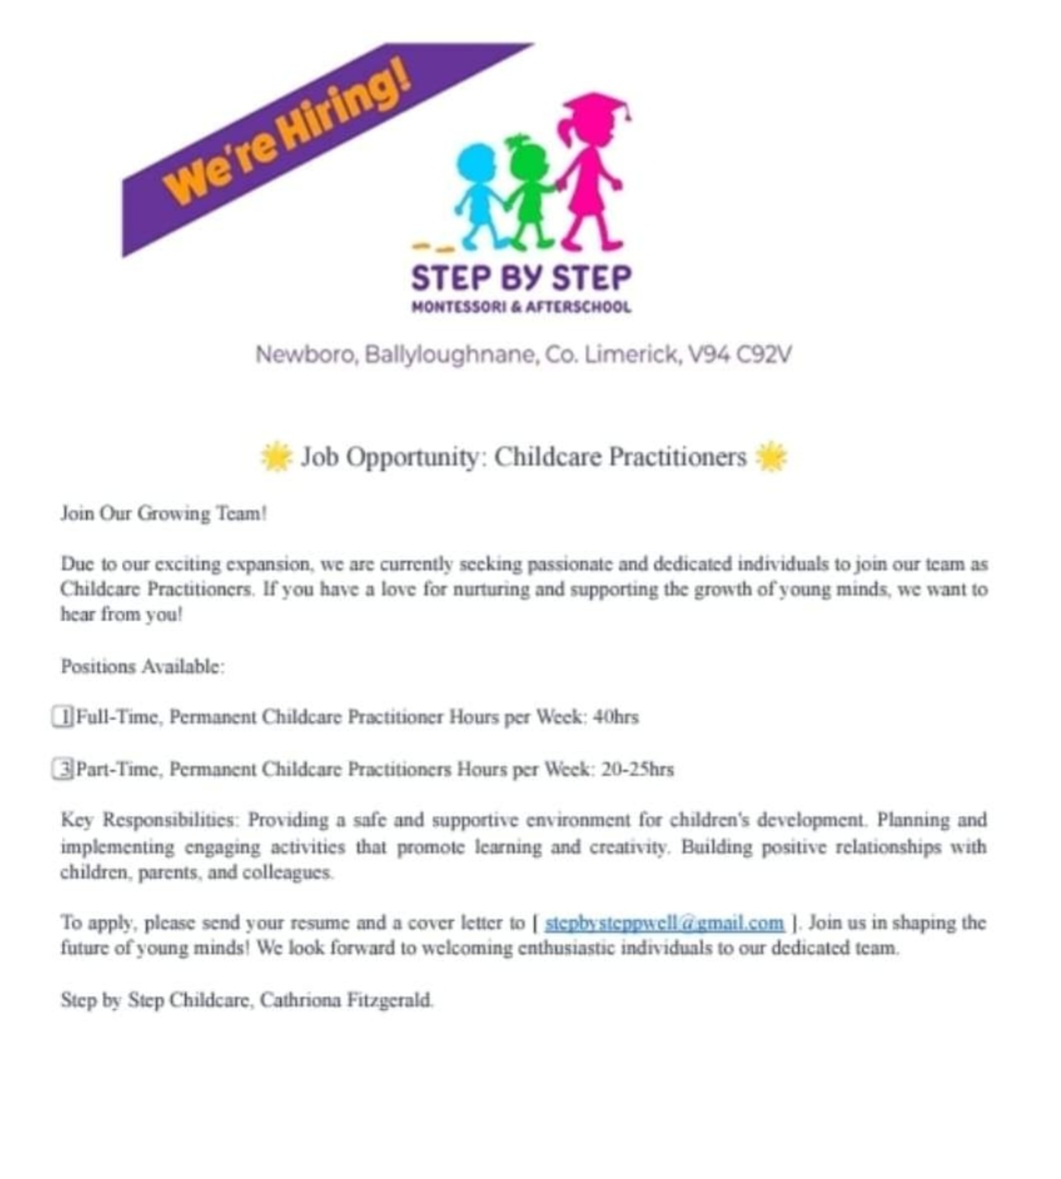 📣Job Opportunity - Childcare Practitioners 📣 Full-time and Part-time roles available. Email resume and cover letter to stepbysteppwell@gmail.com #ad #jobfairy